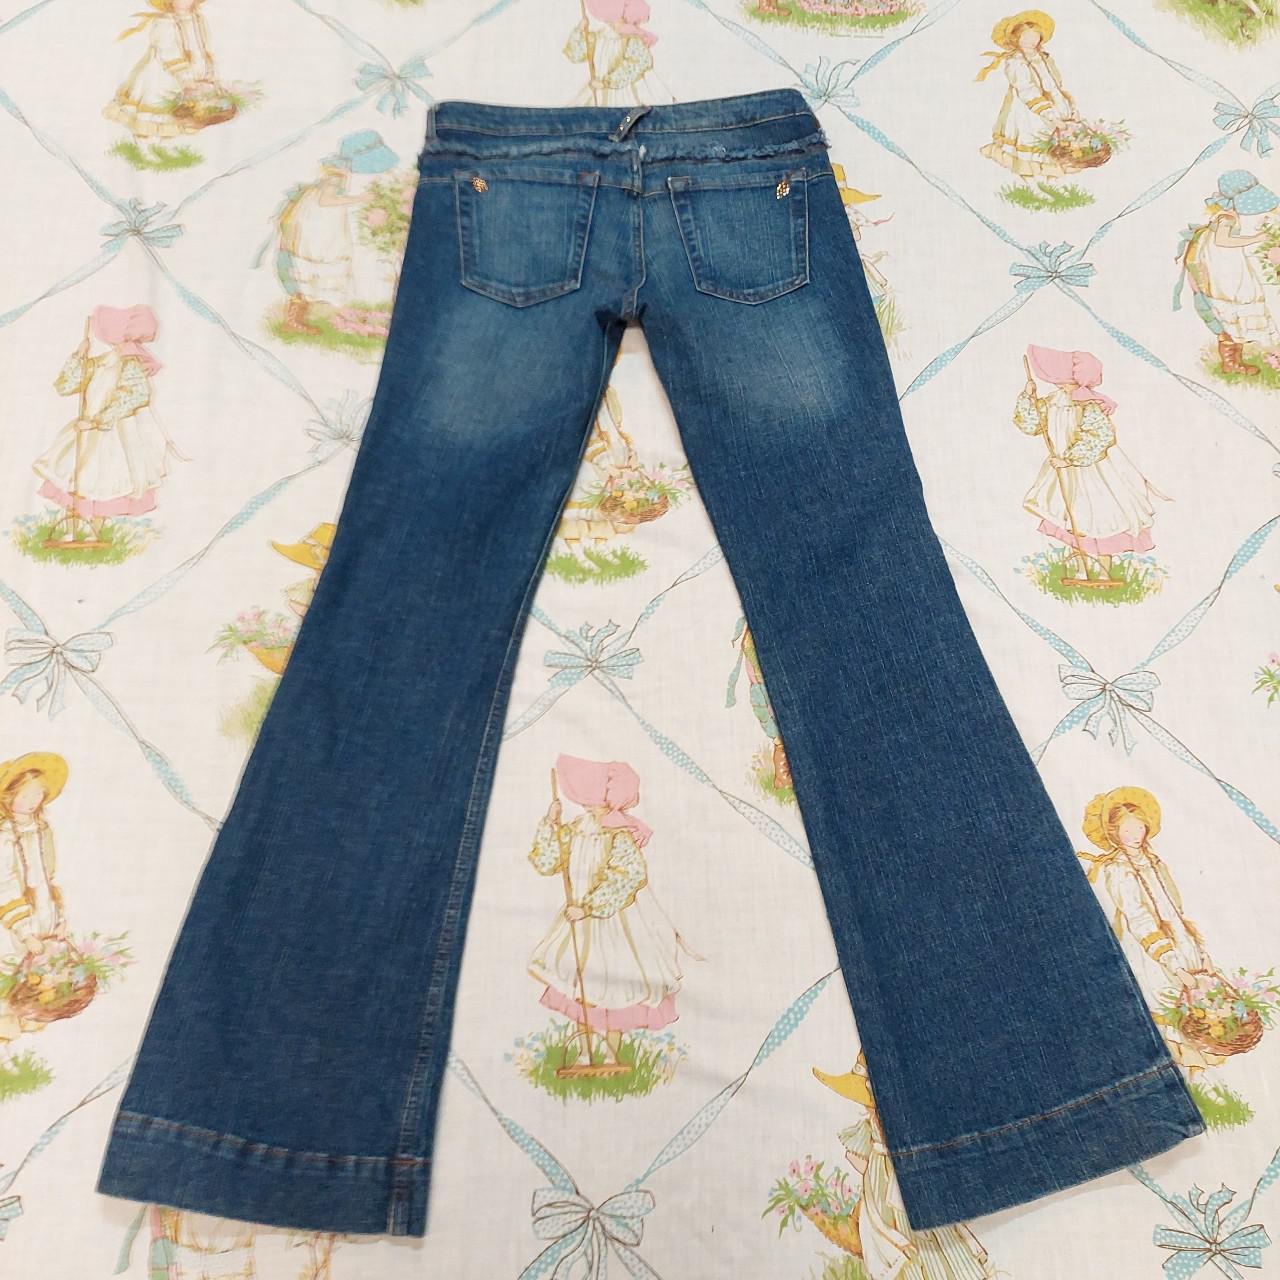 Product Image 2 - Y2k l.e.i. Jeans
Manufacturer distressing around